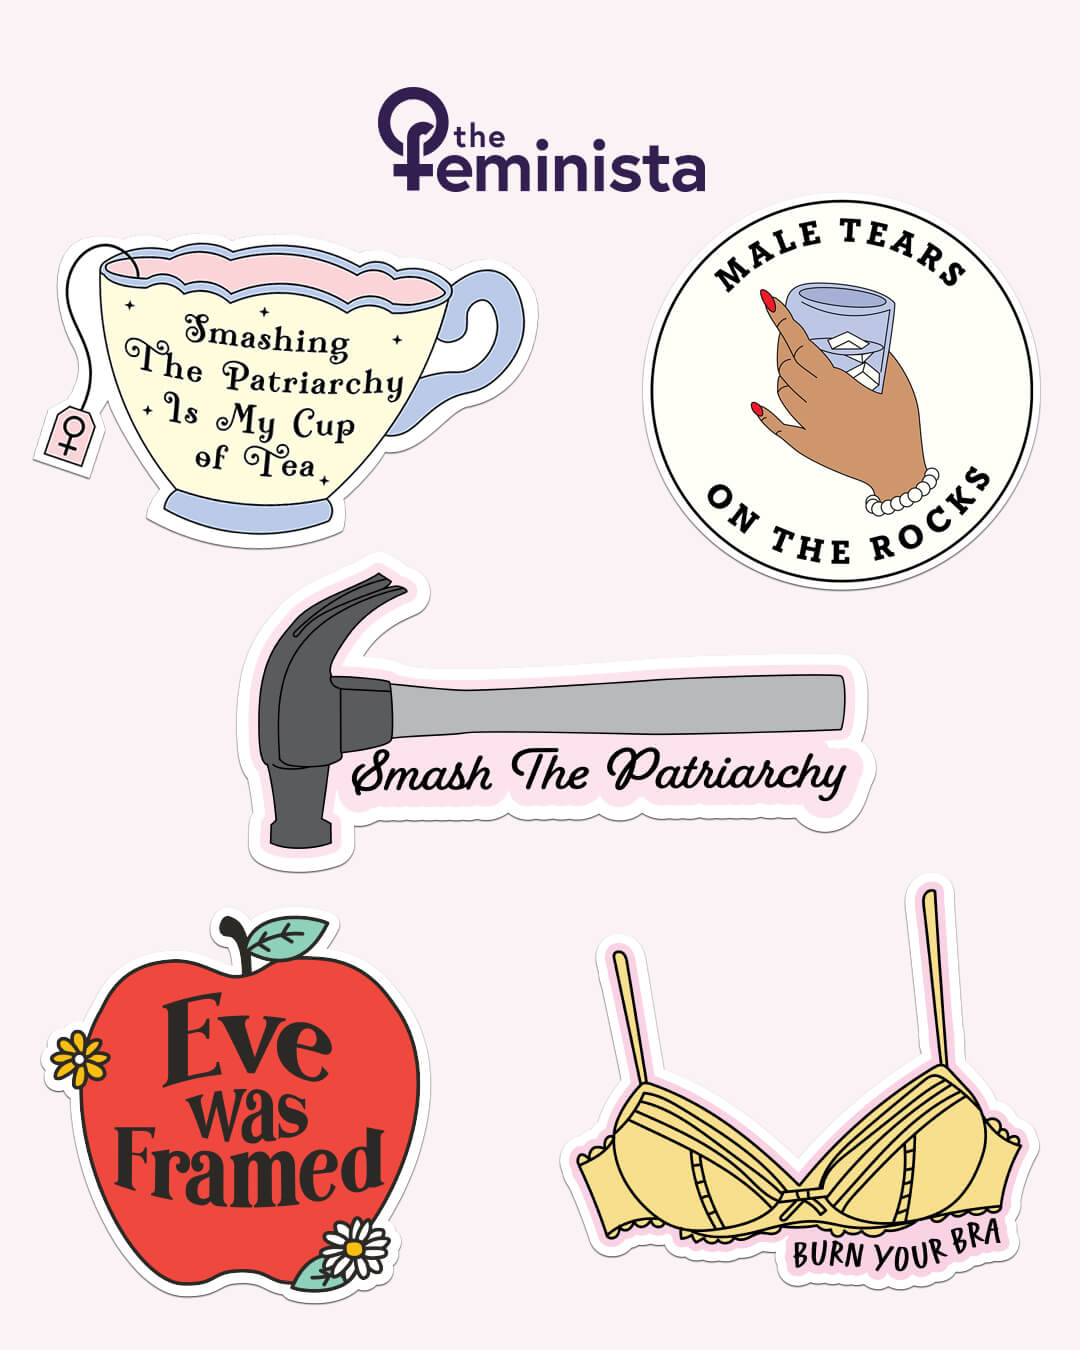 Feminist sticker pack with five small decals